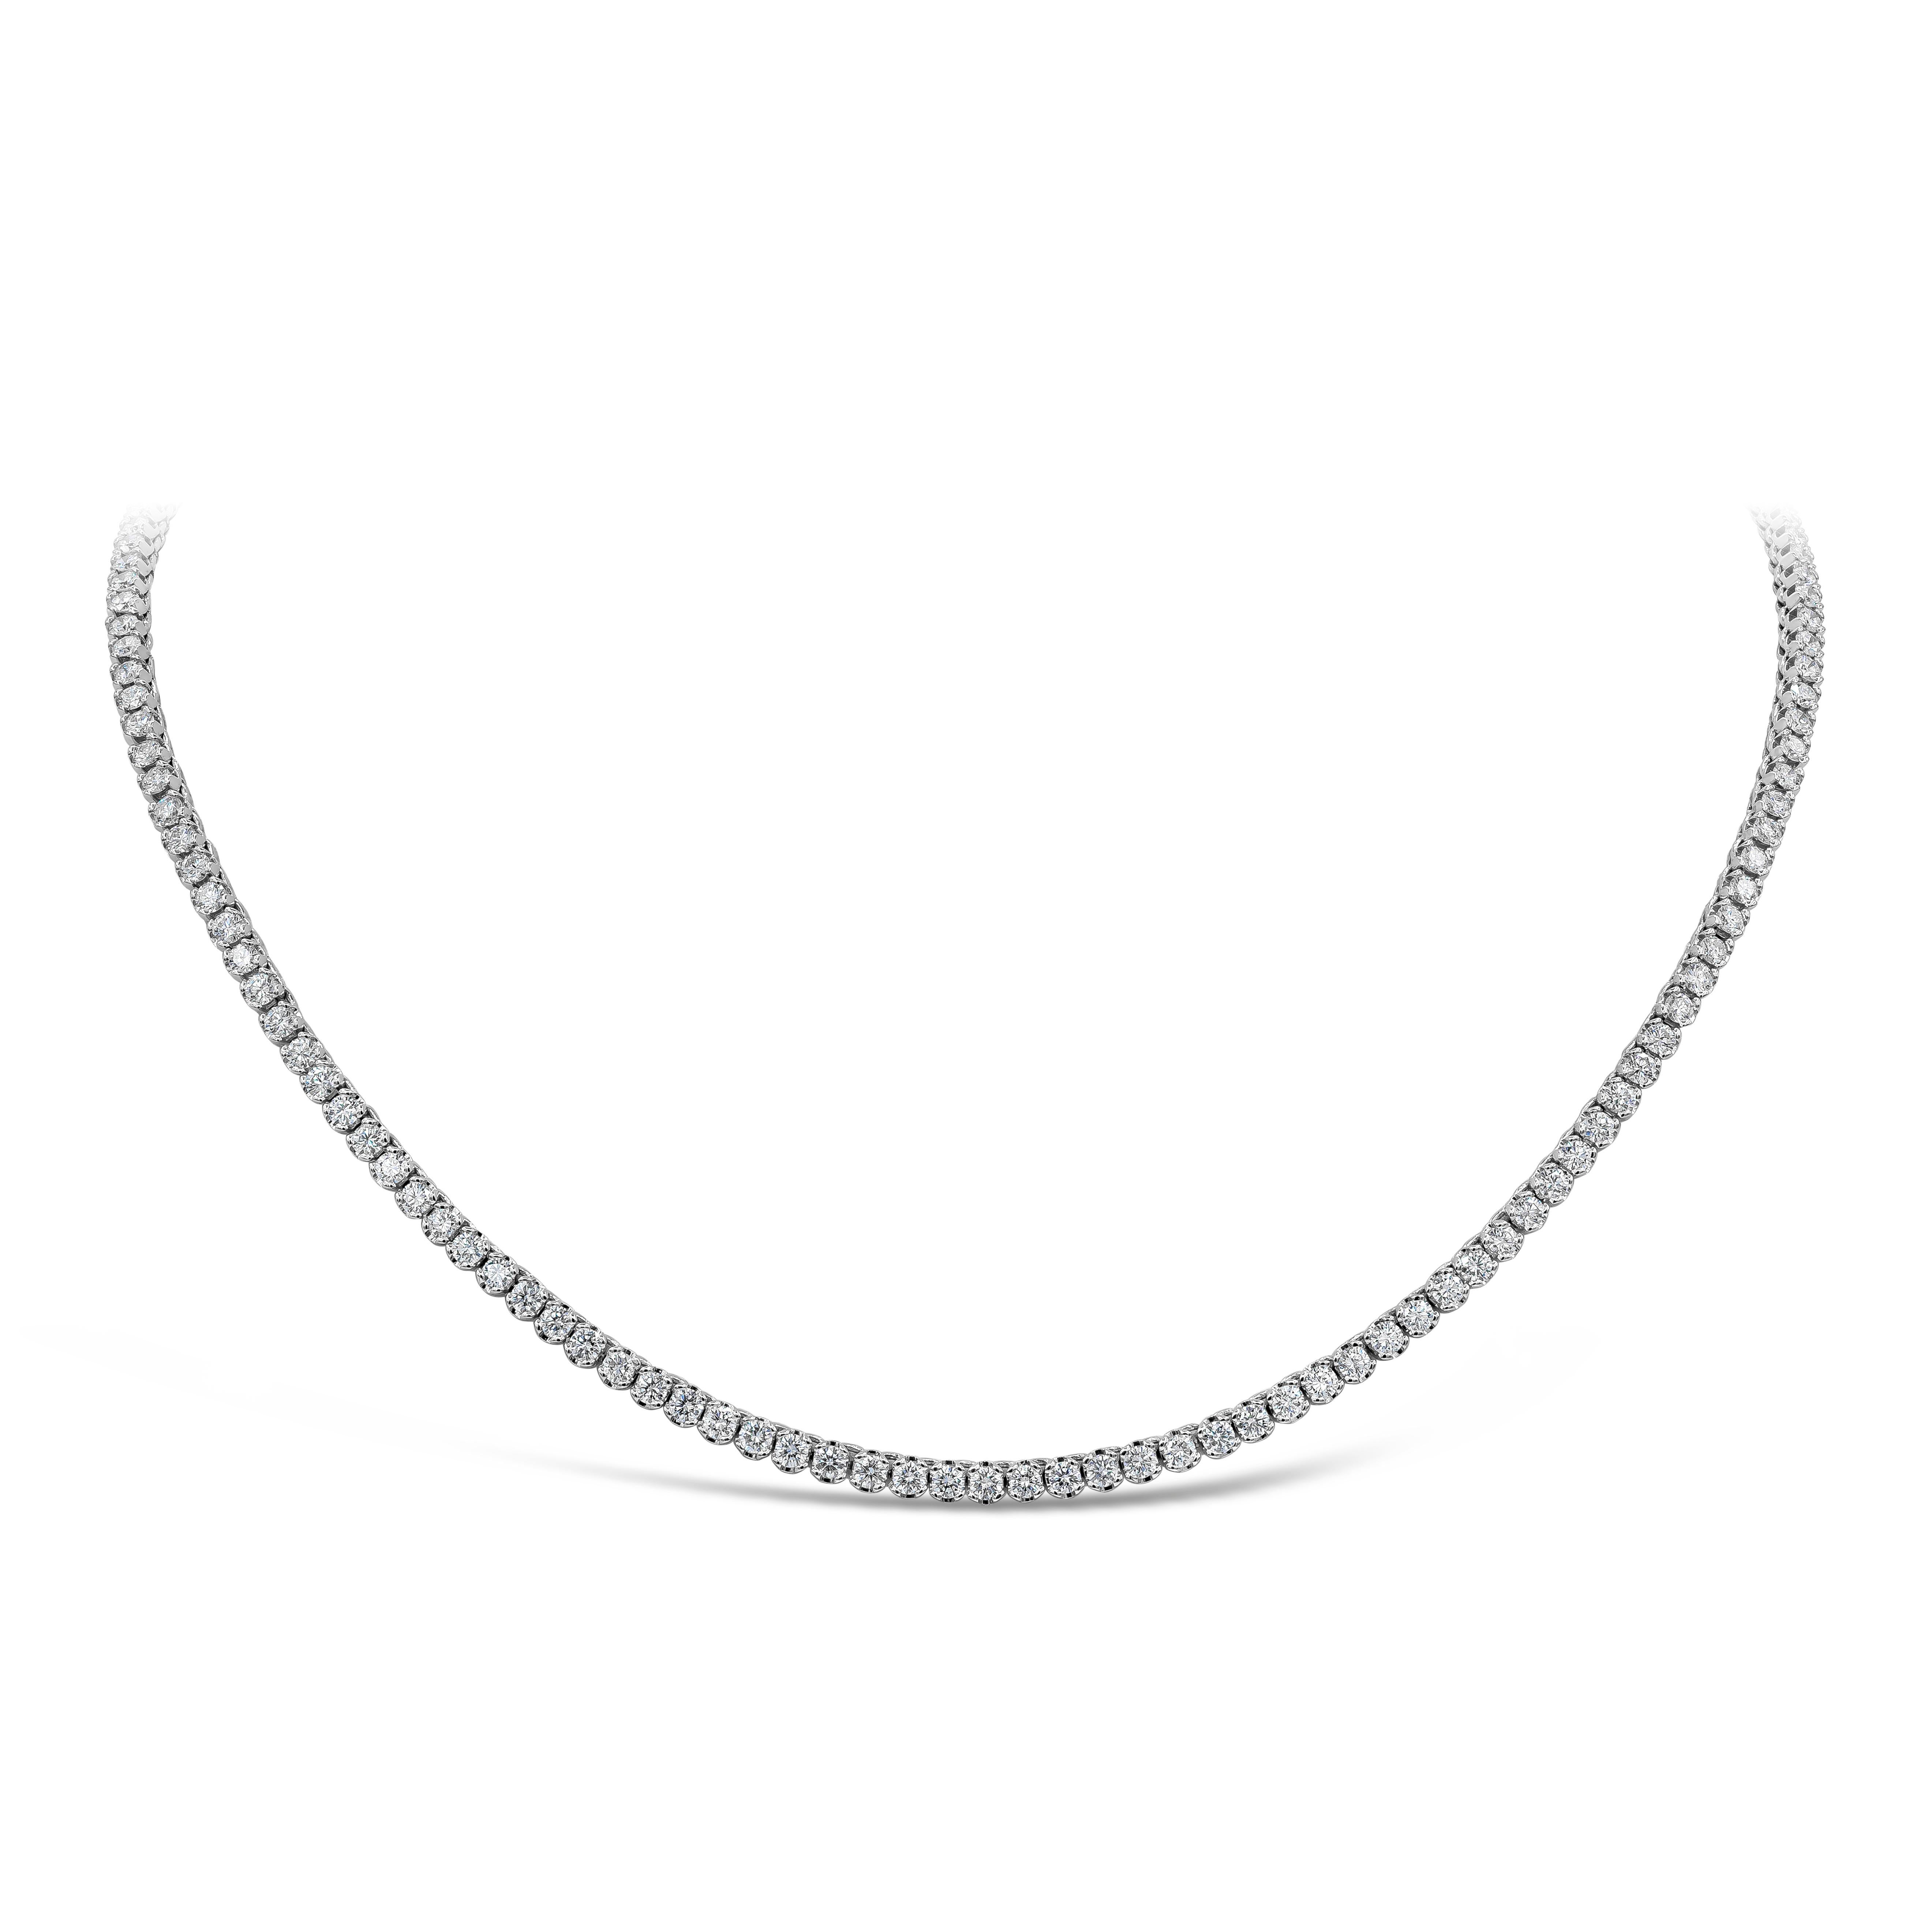 A versatile piece of jewelry showcasing a row of round brilliant diamonds weighing 9.80 carats total, F color and VS-SI1 in clarity. Set in classic four prong 18K white gold setting. 17.5 inches in length.

